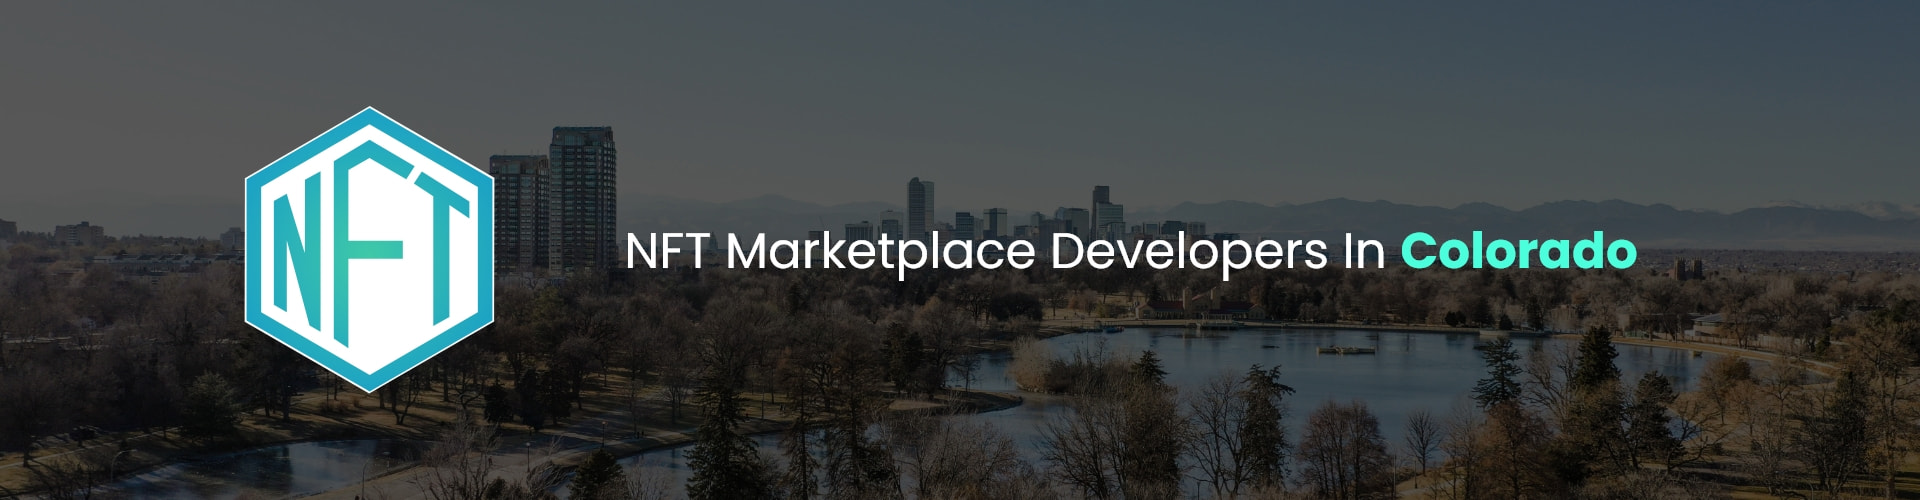 hire nft marketplace developers in colorado